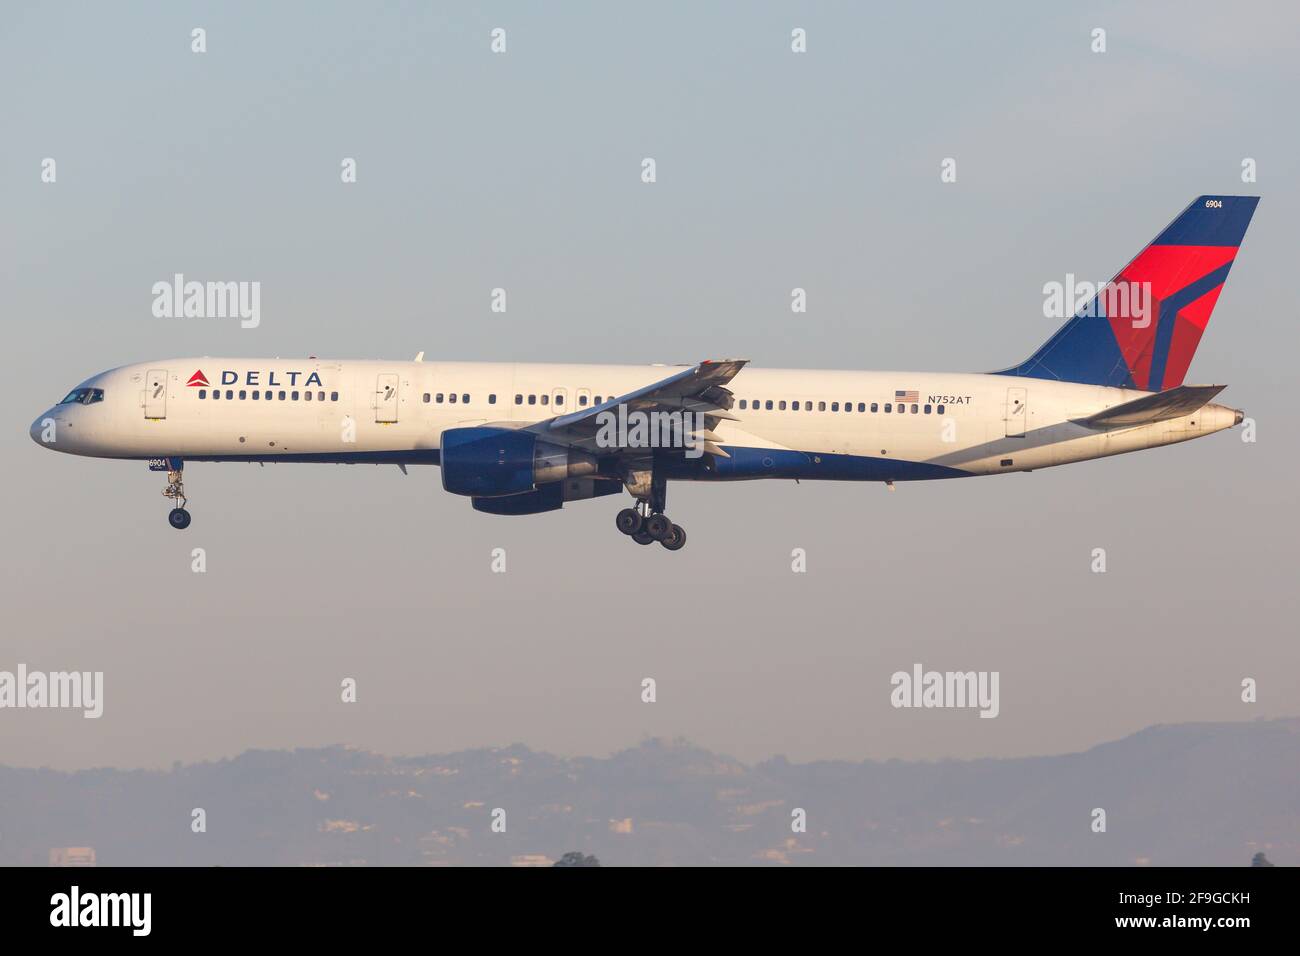 Los Angeles, USA - 22. February 2016: Delta Airlines Boeing 757-200 at Los Angeles airport (LAX) in the USA. Boeing is an aircraft manufacturer based Stock Photo